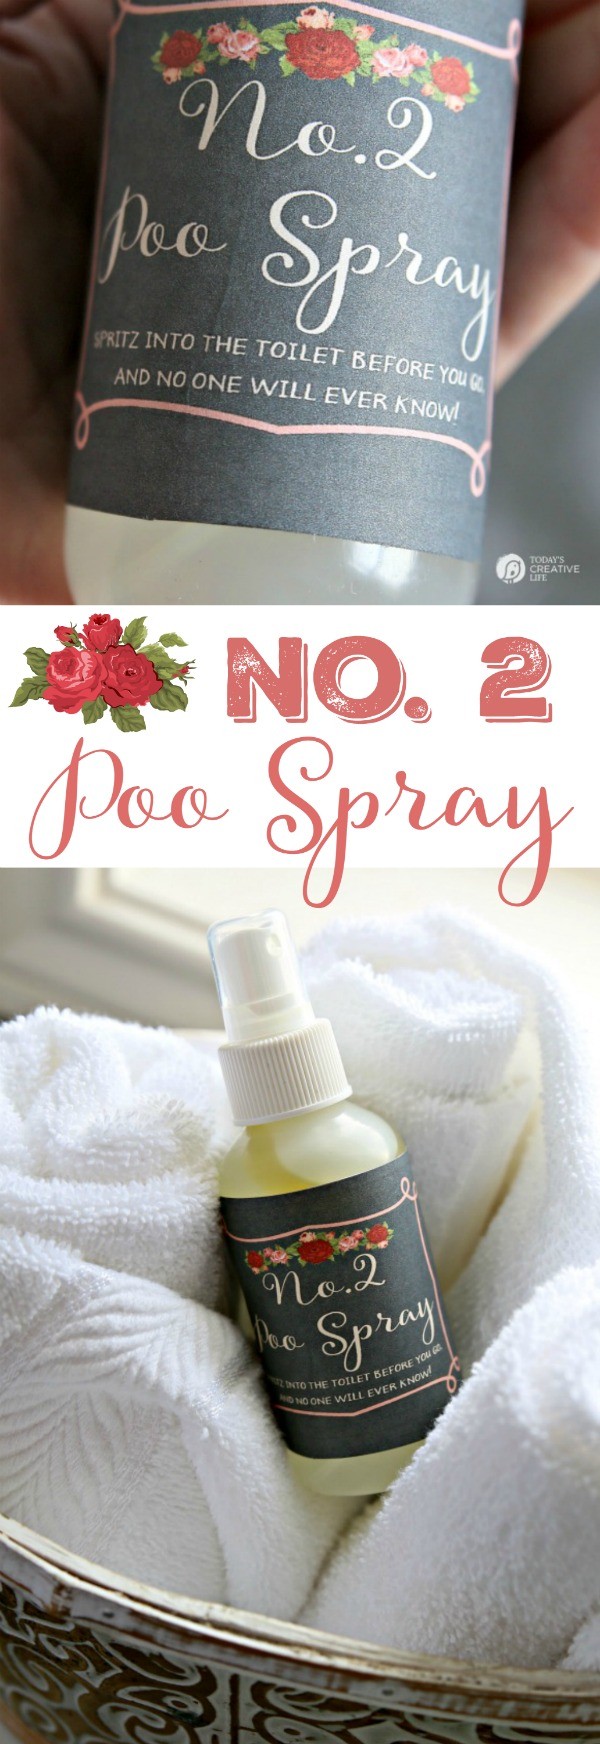 Homemade No.2 Poo Spray Tutorial | Make your own Poo Pot pourri toilet spray to hide embarrassing smells. Just spritz into the toilet before going and no embarrassing odors. The Free Printable labels is yours too! See step by step instructions on TodaysCreativeLife.com